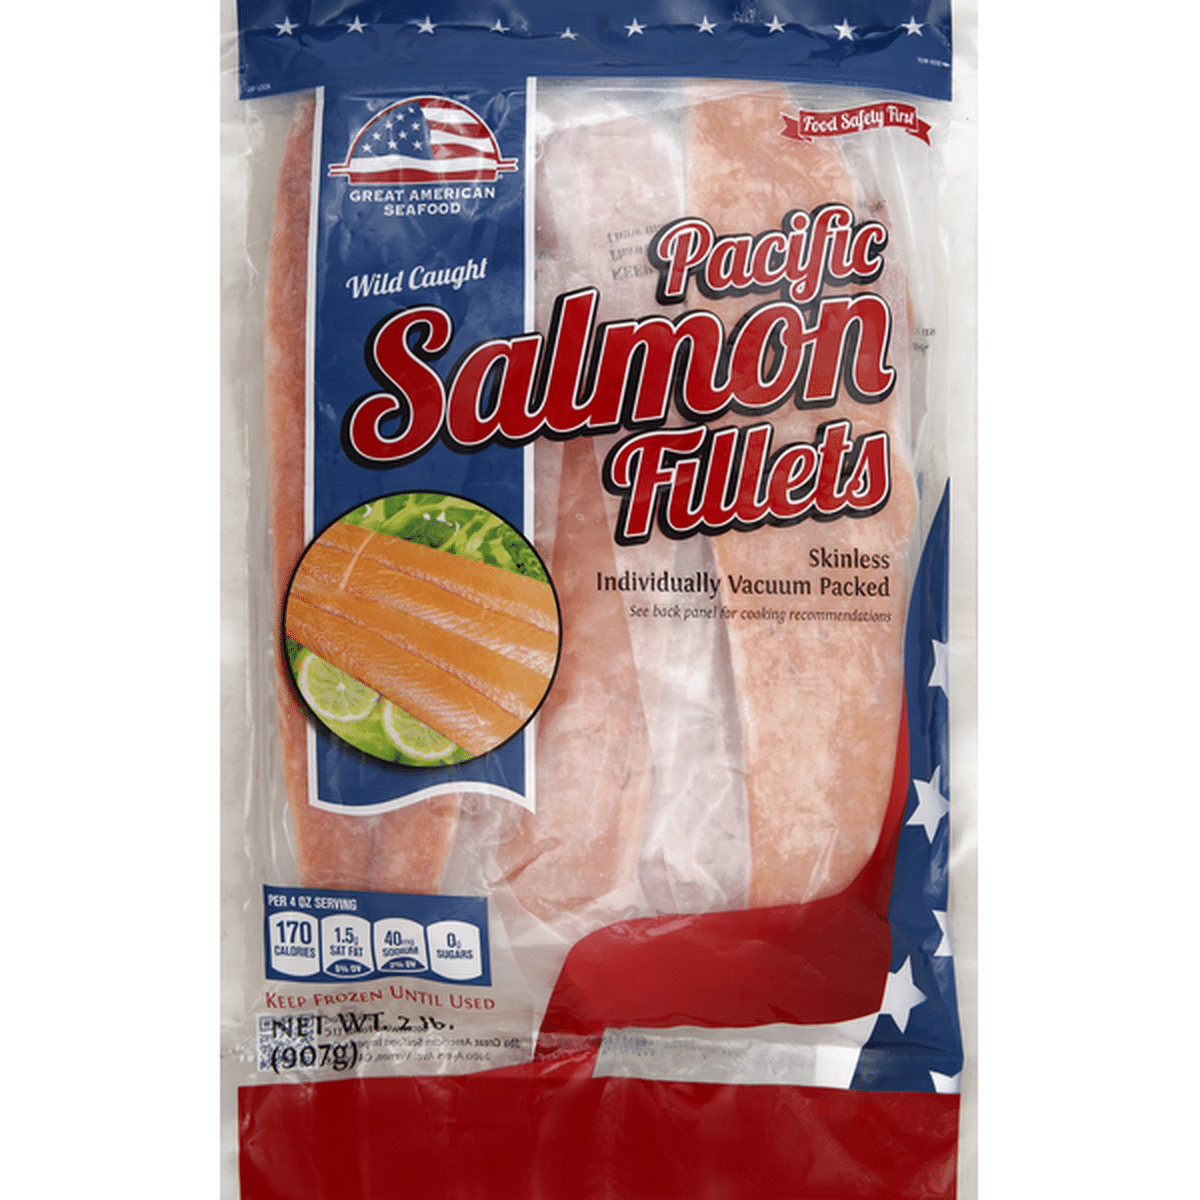 Great American Seafood Salmon Fillets